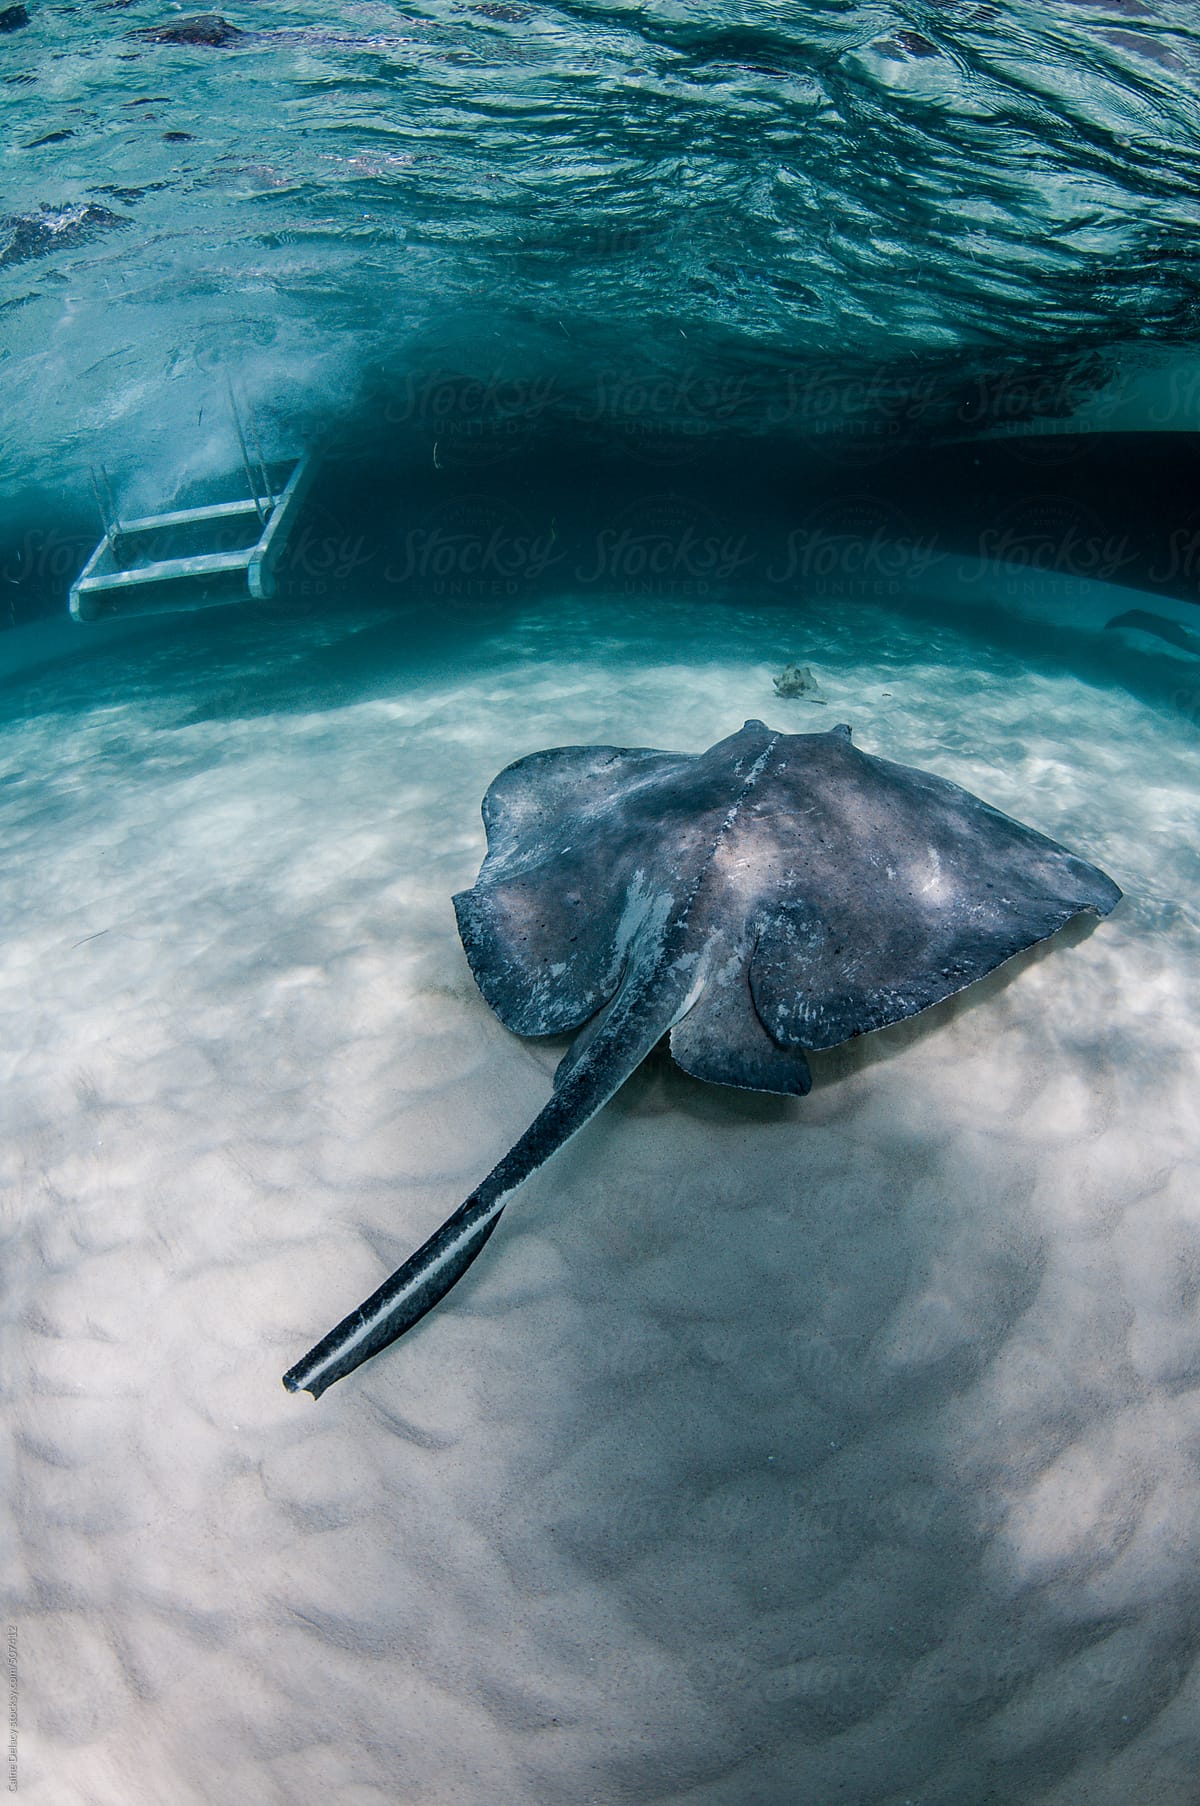 Southern Stingray cruising over sand